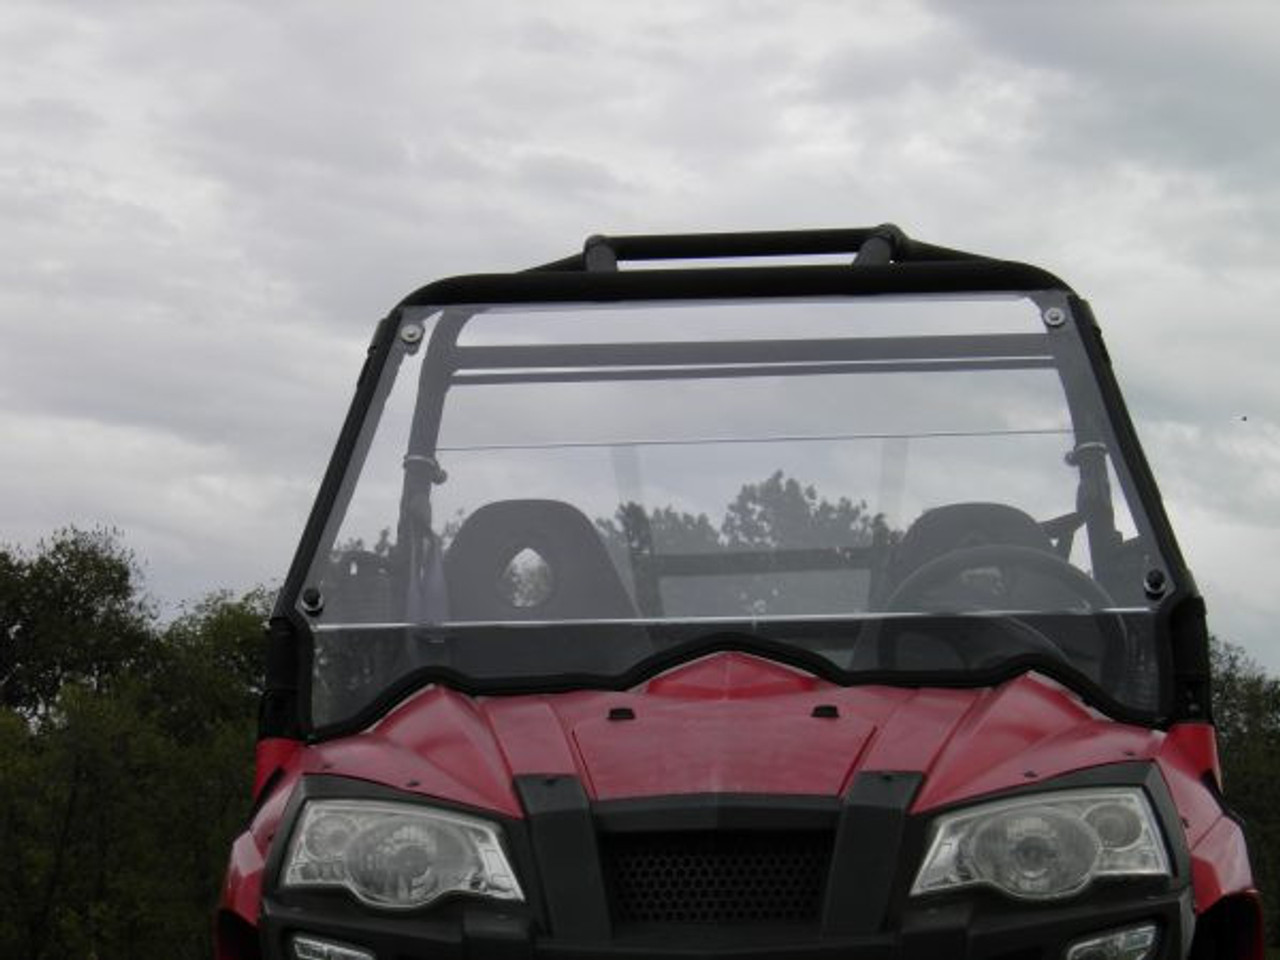 3 Star side x side Hisun Sector 550/750 windshield front view